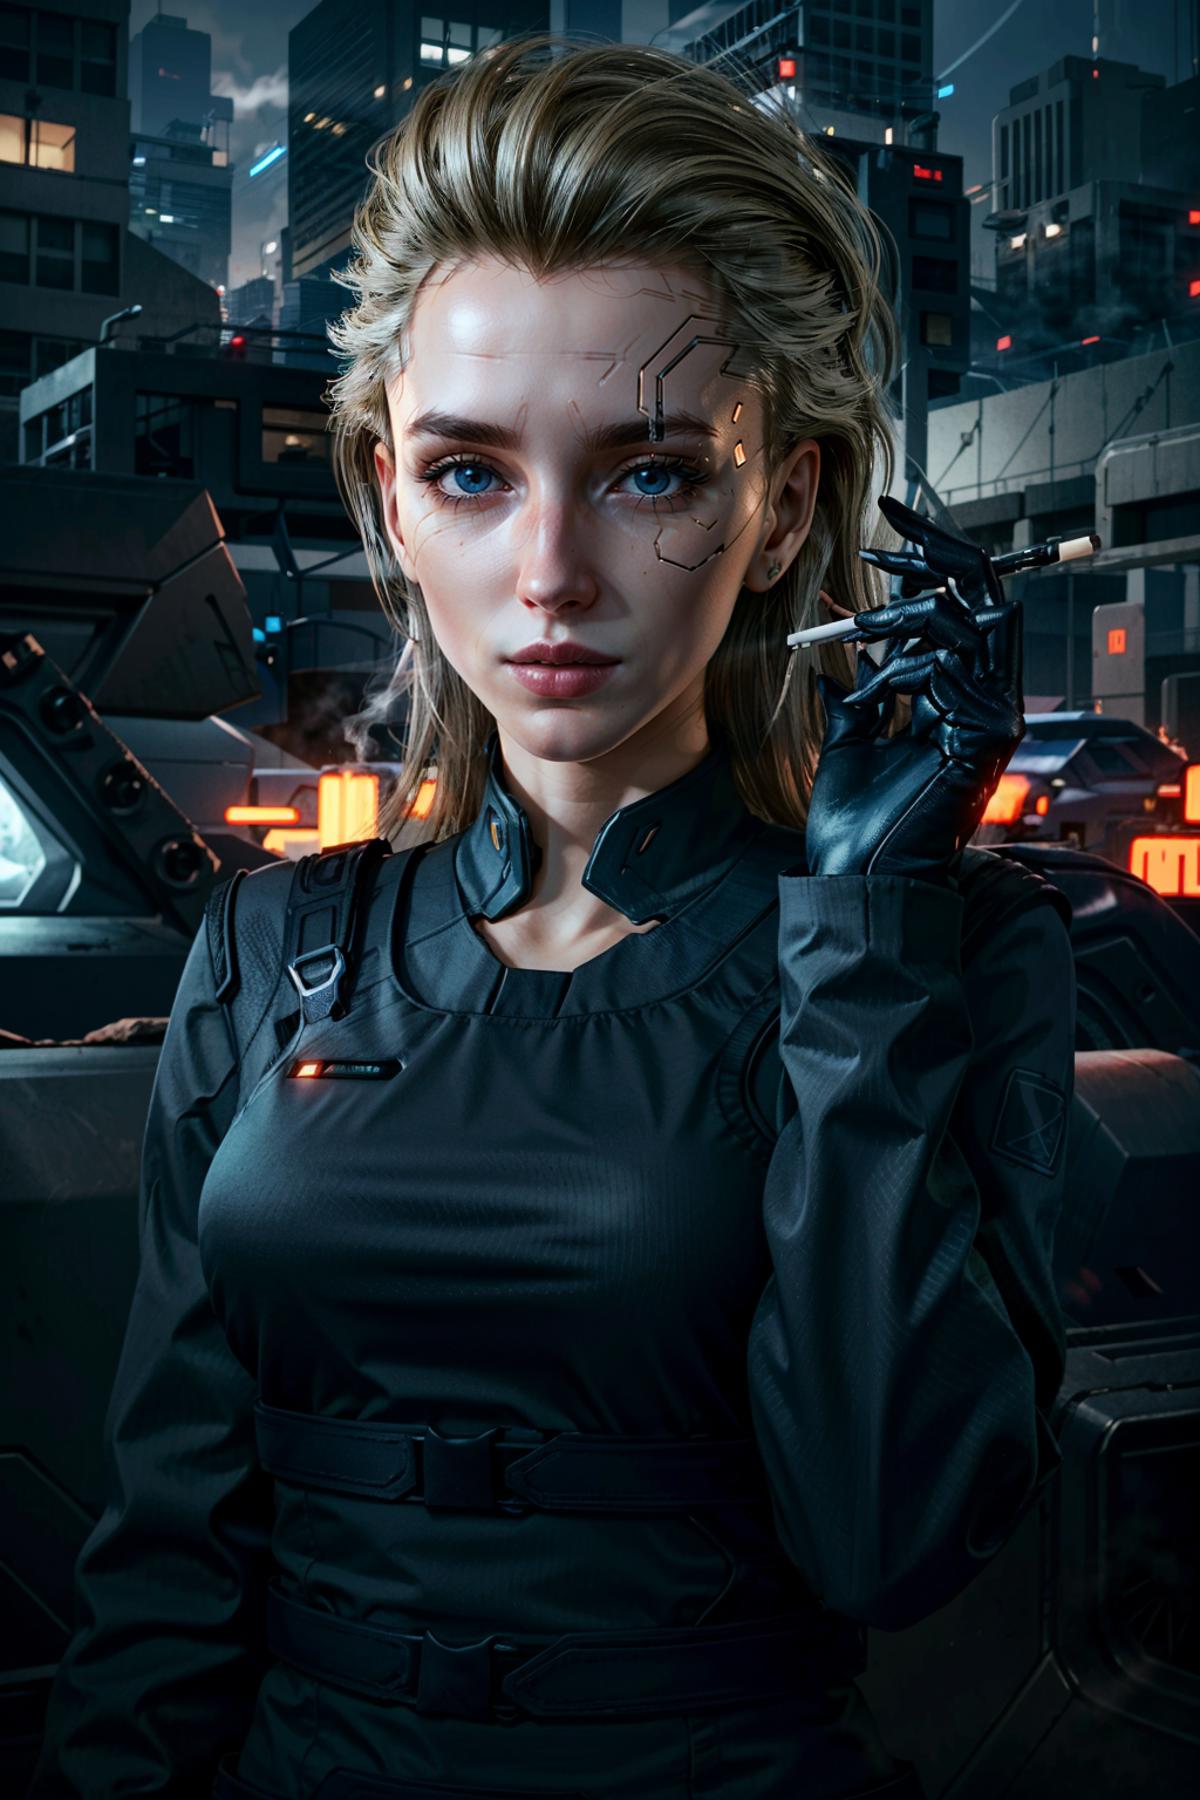 Meredith Stout from Cyberpunk 2077 image by BloodRedKittie